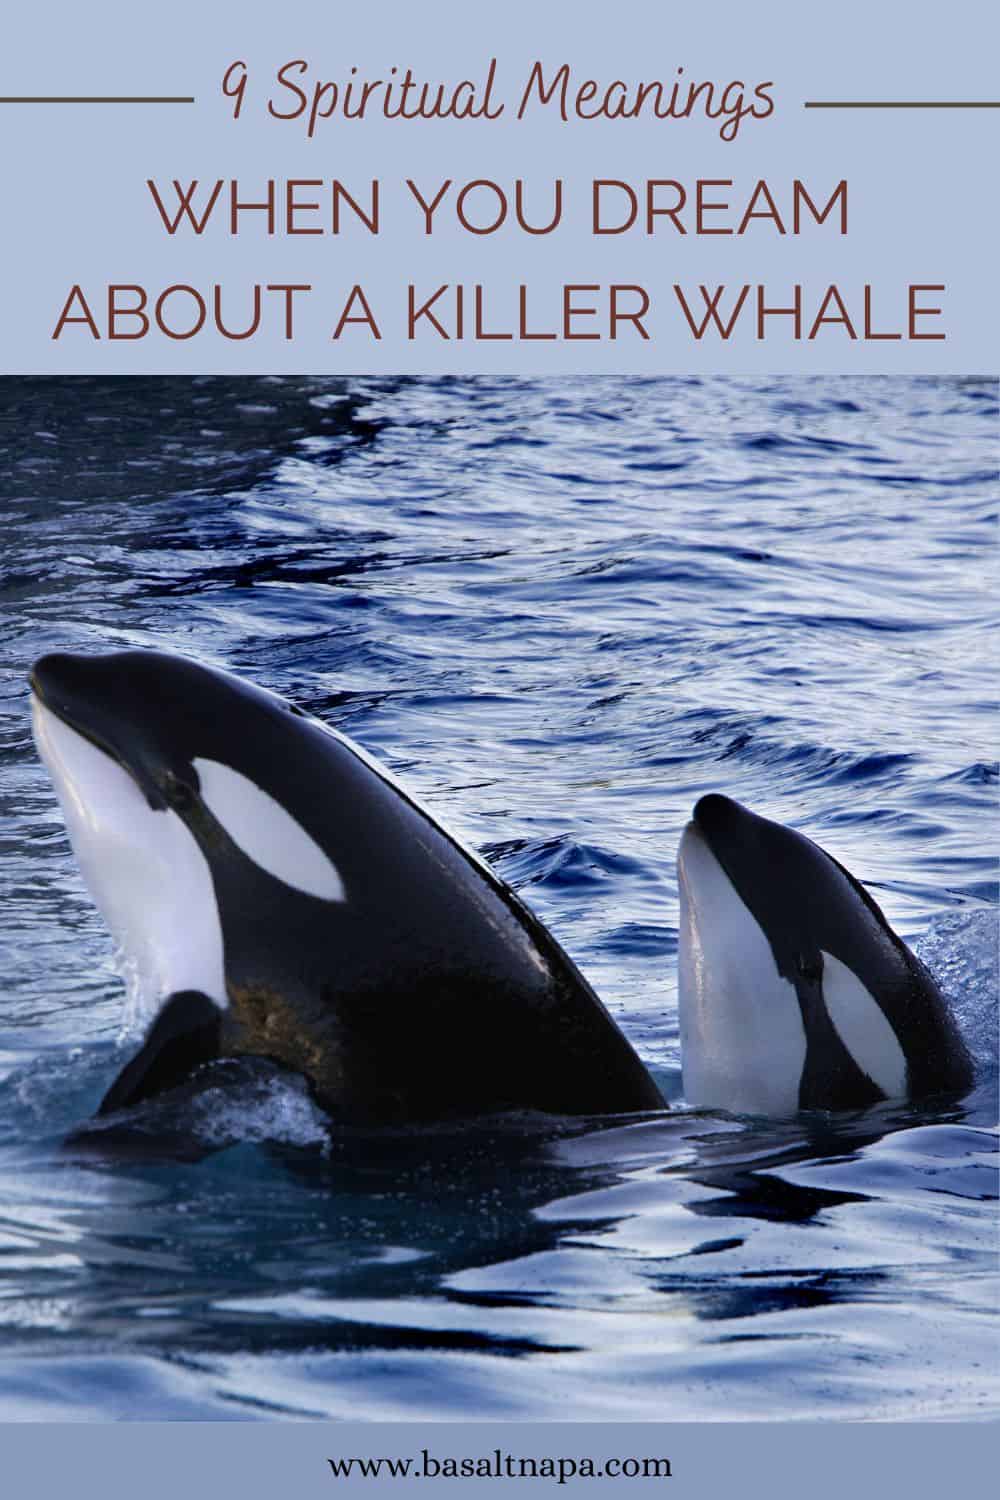 Dream about a killer whale meanings